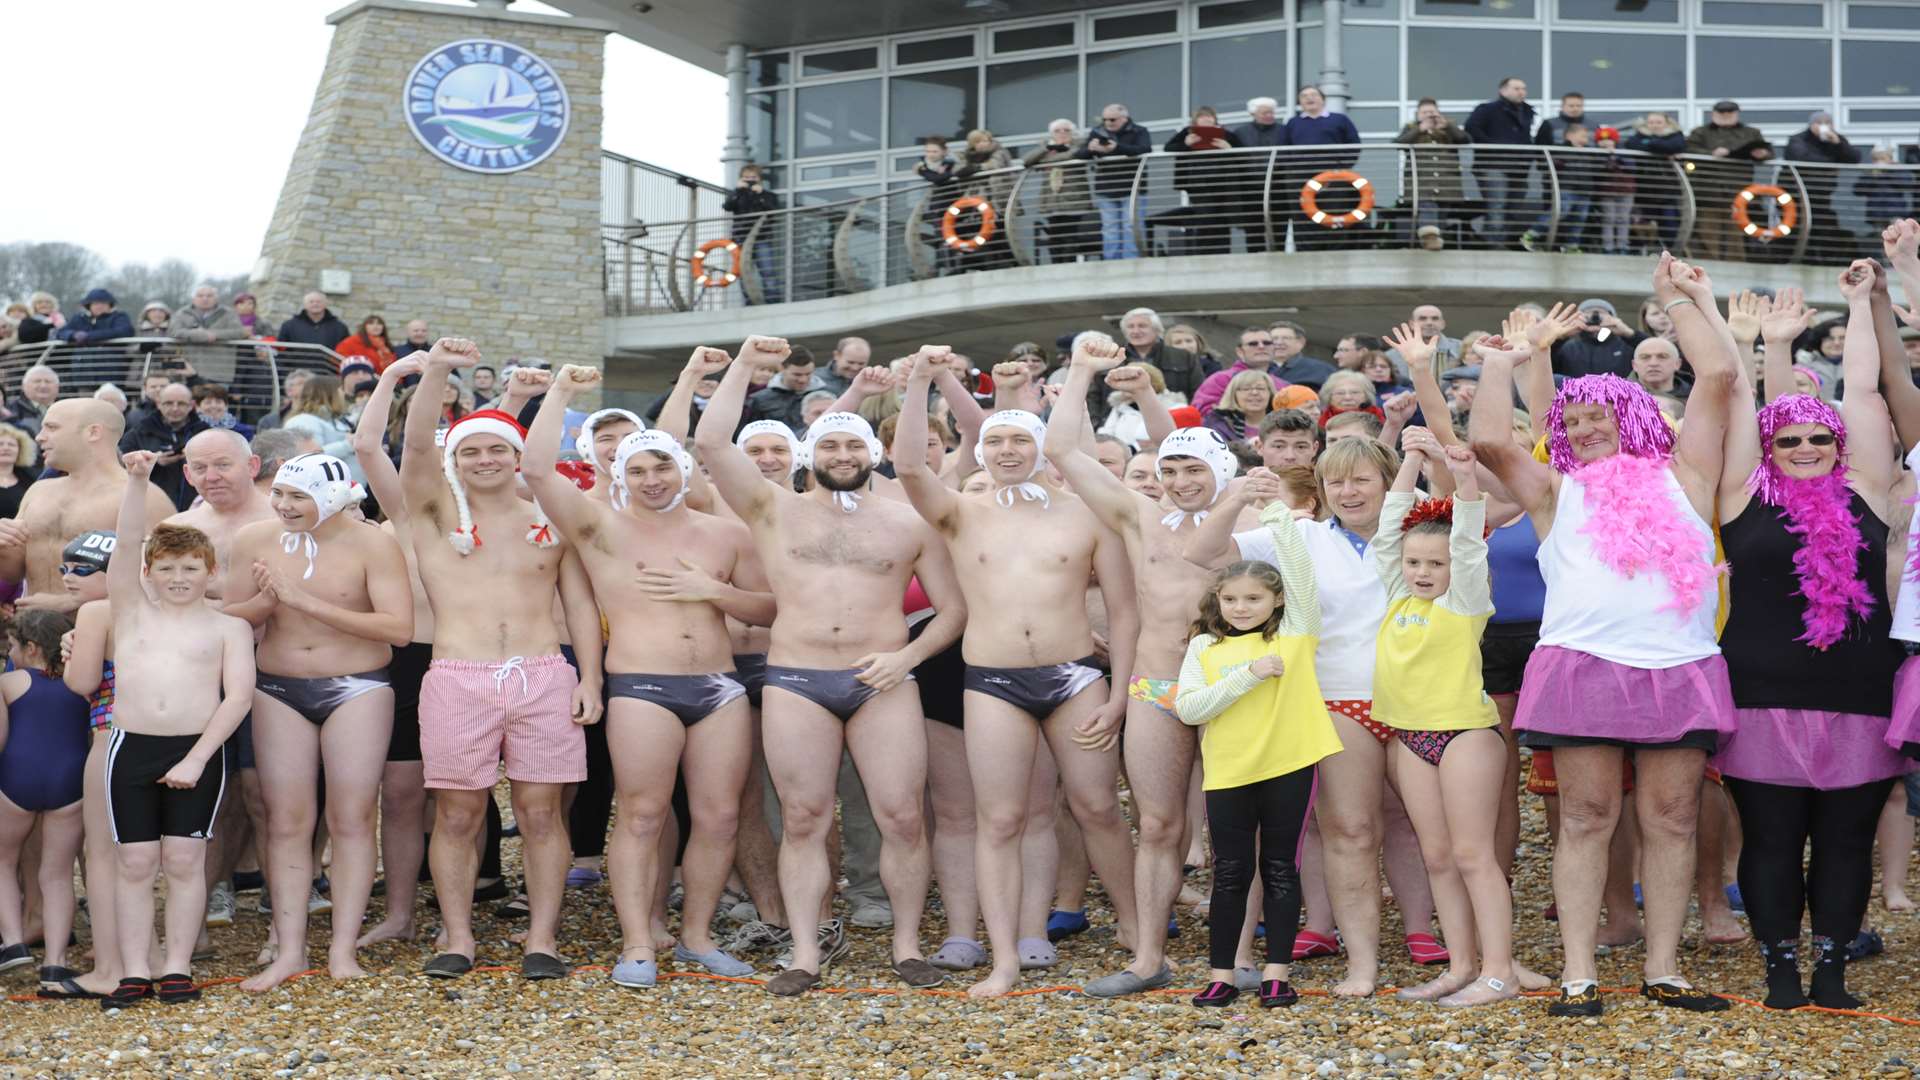 The dip in Dover also attracts a good crowd